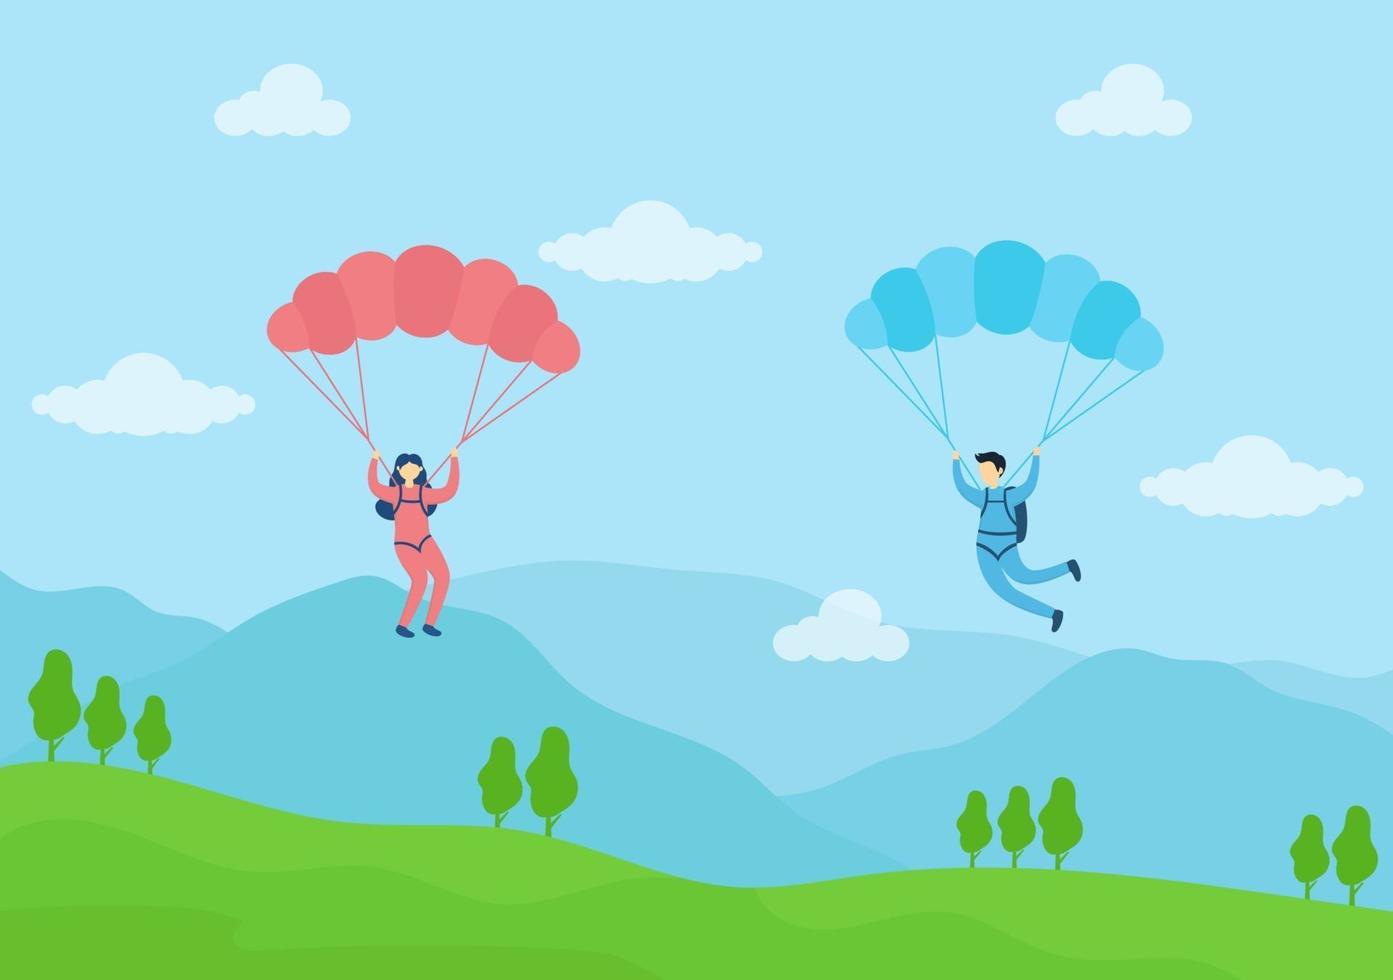 Skydive Sport of Outdoor Activity Recreation Using Parachute Vector